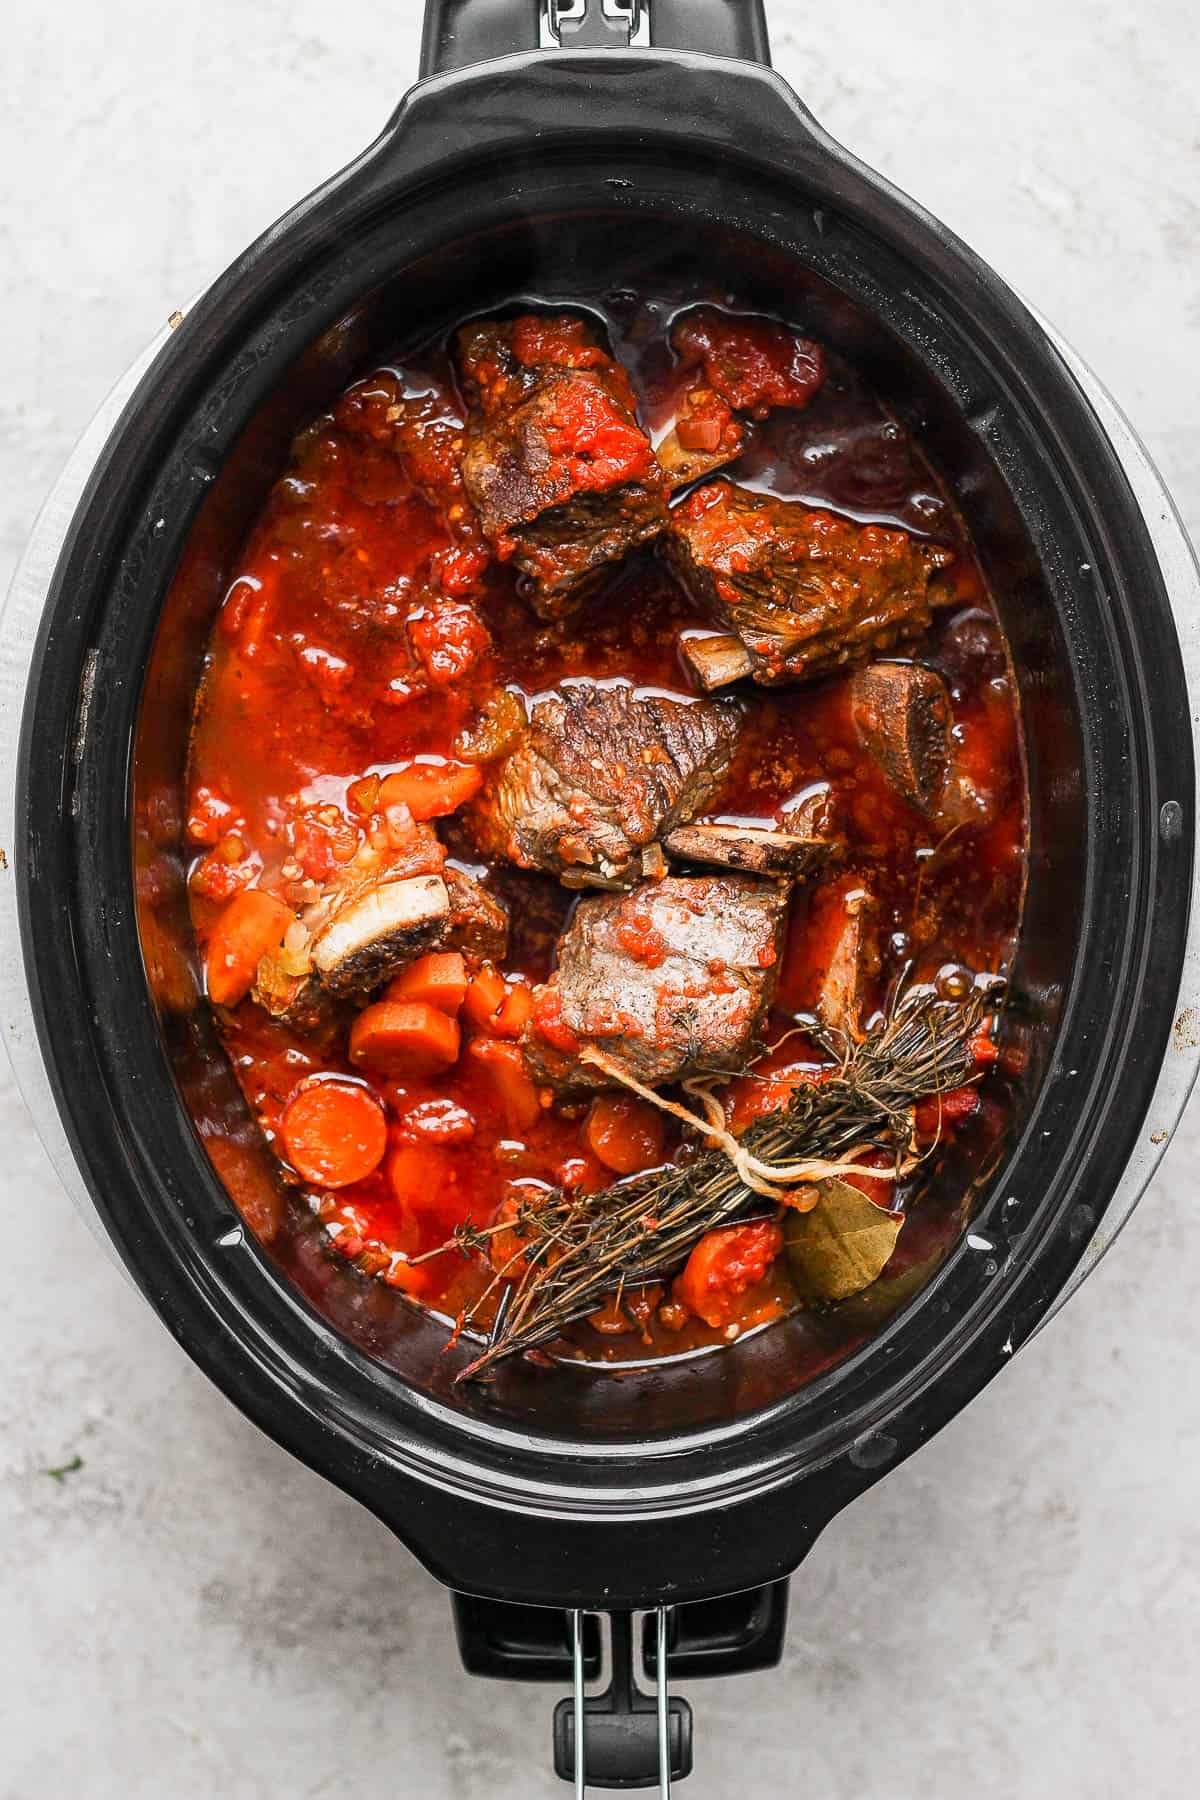 After cooking in the slow cooker the short ribs are cooked in the marinara sauce.